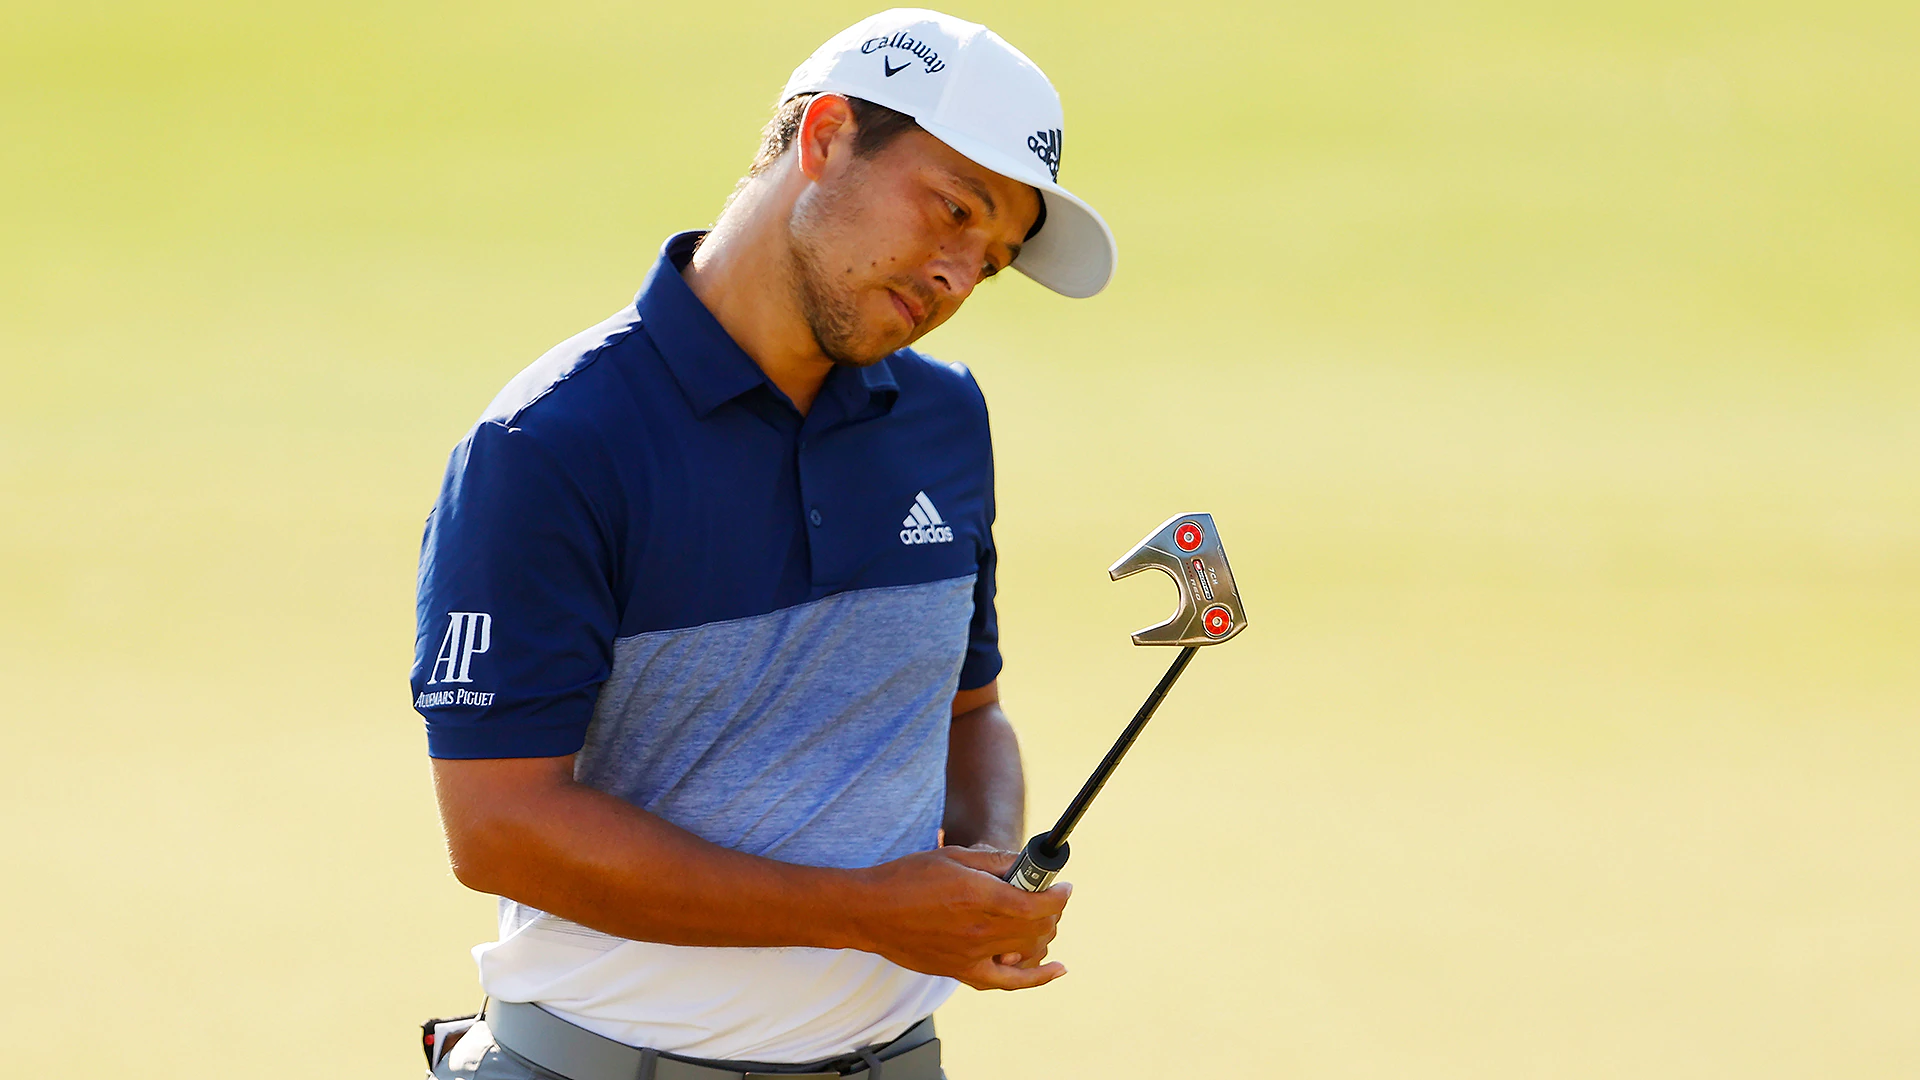 Xander Schauffele had the lowest four-round total, but finished co-runner-up